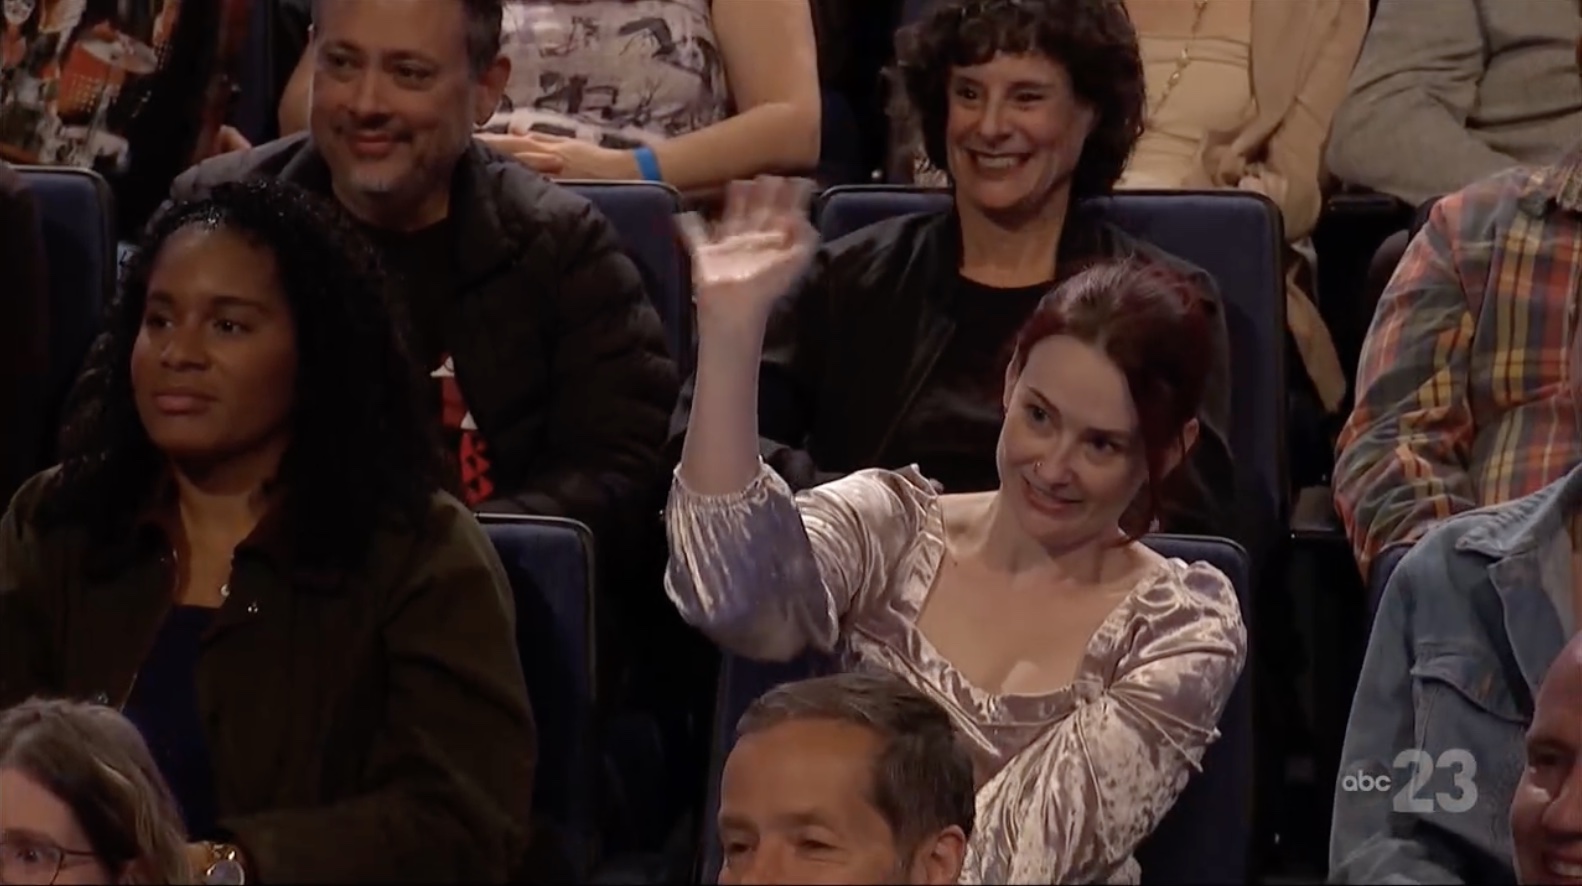 Matt's wife, Amy Anthony, smiled and waved at the camera during his episode